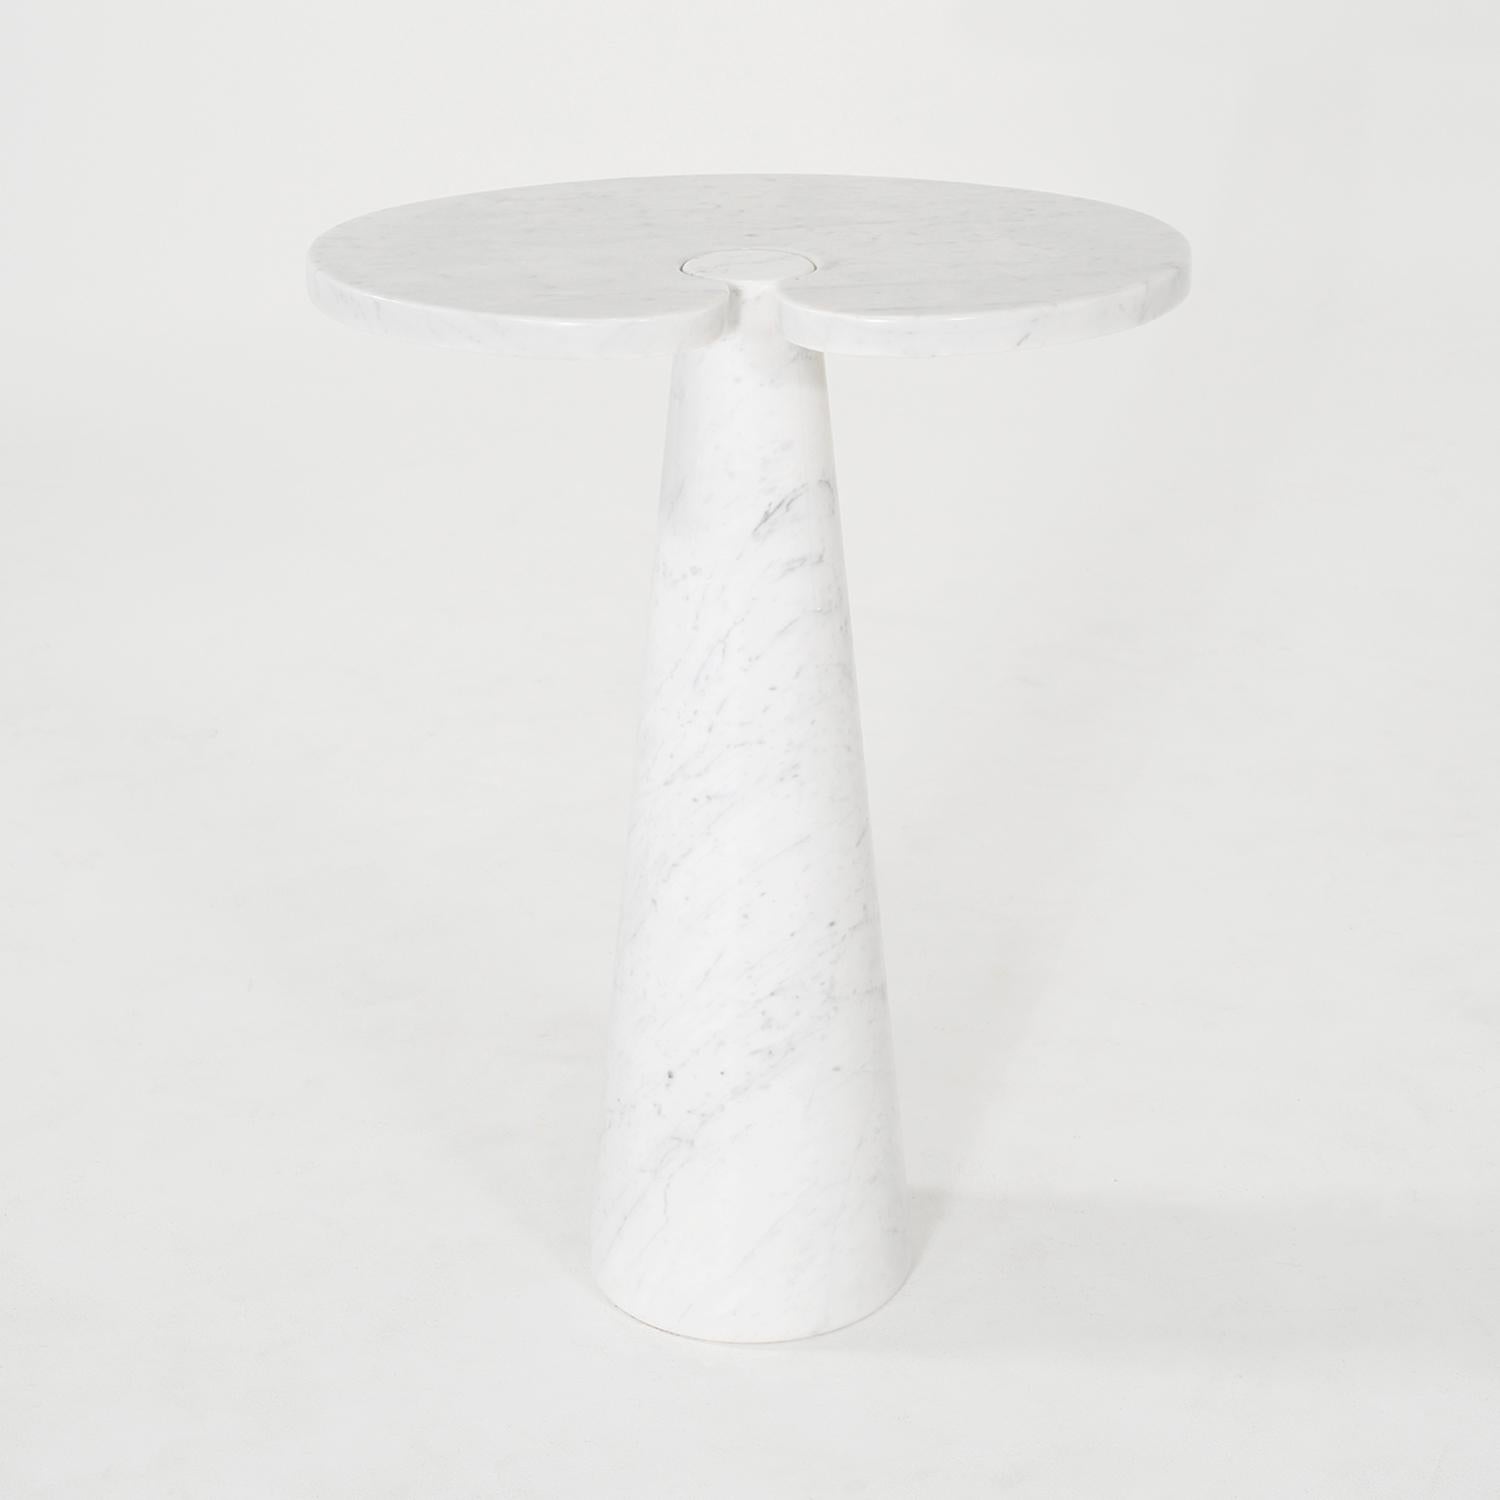 A white-grey, similar vintage Mid-Century modern Italian pair of freestanding side, corner tables made of hand crafted Carrara marble, designed by Angelo Mangiarotti and produced by Skipper in good condition. The half round, tall Eros end tables